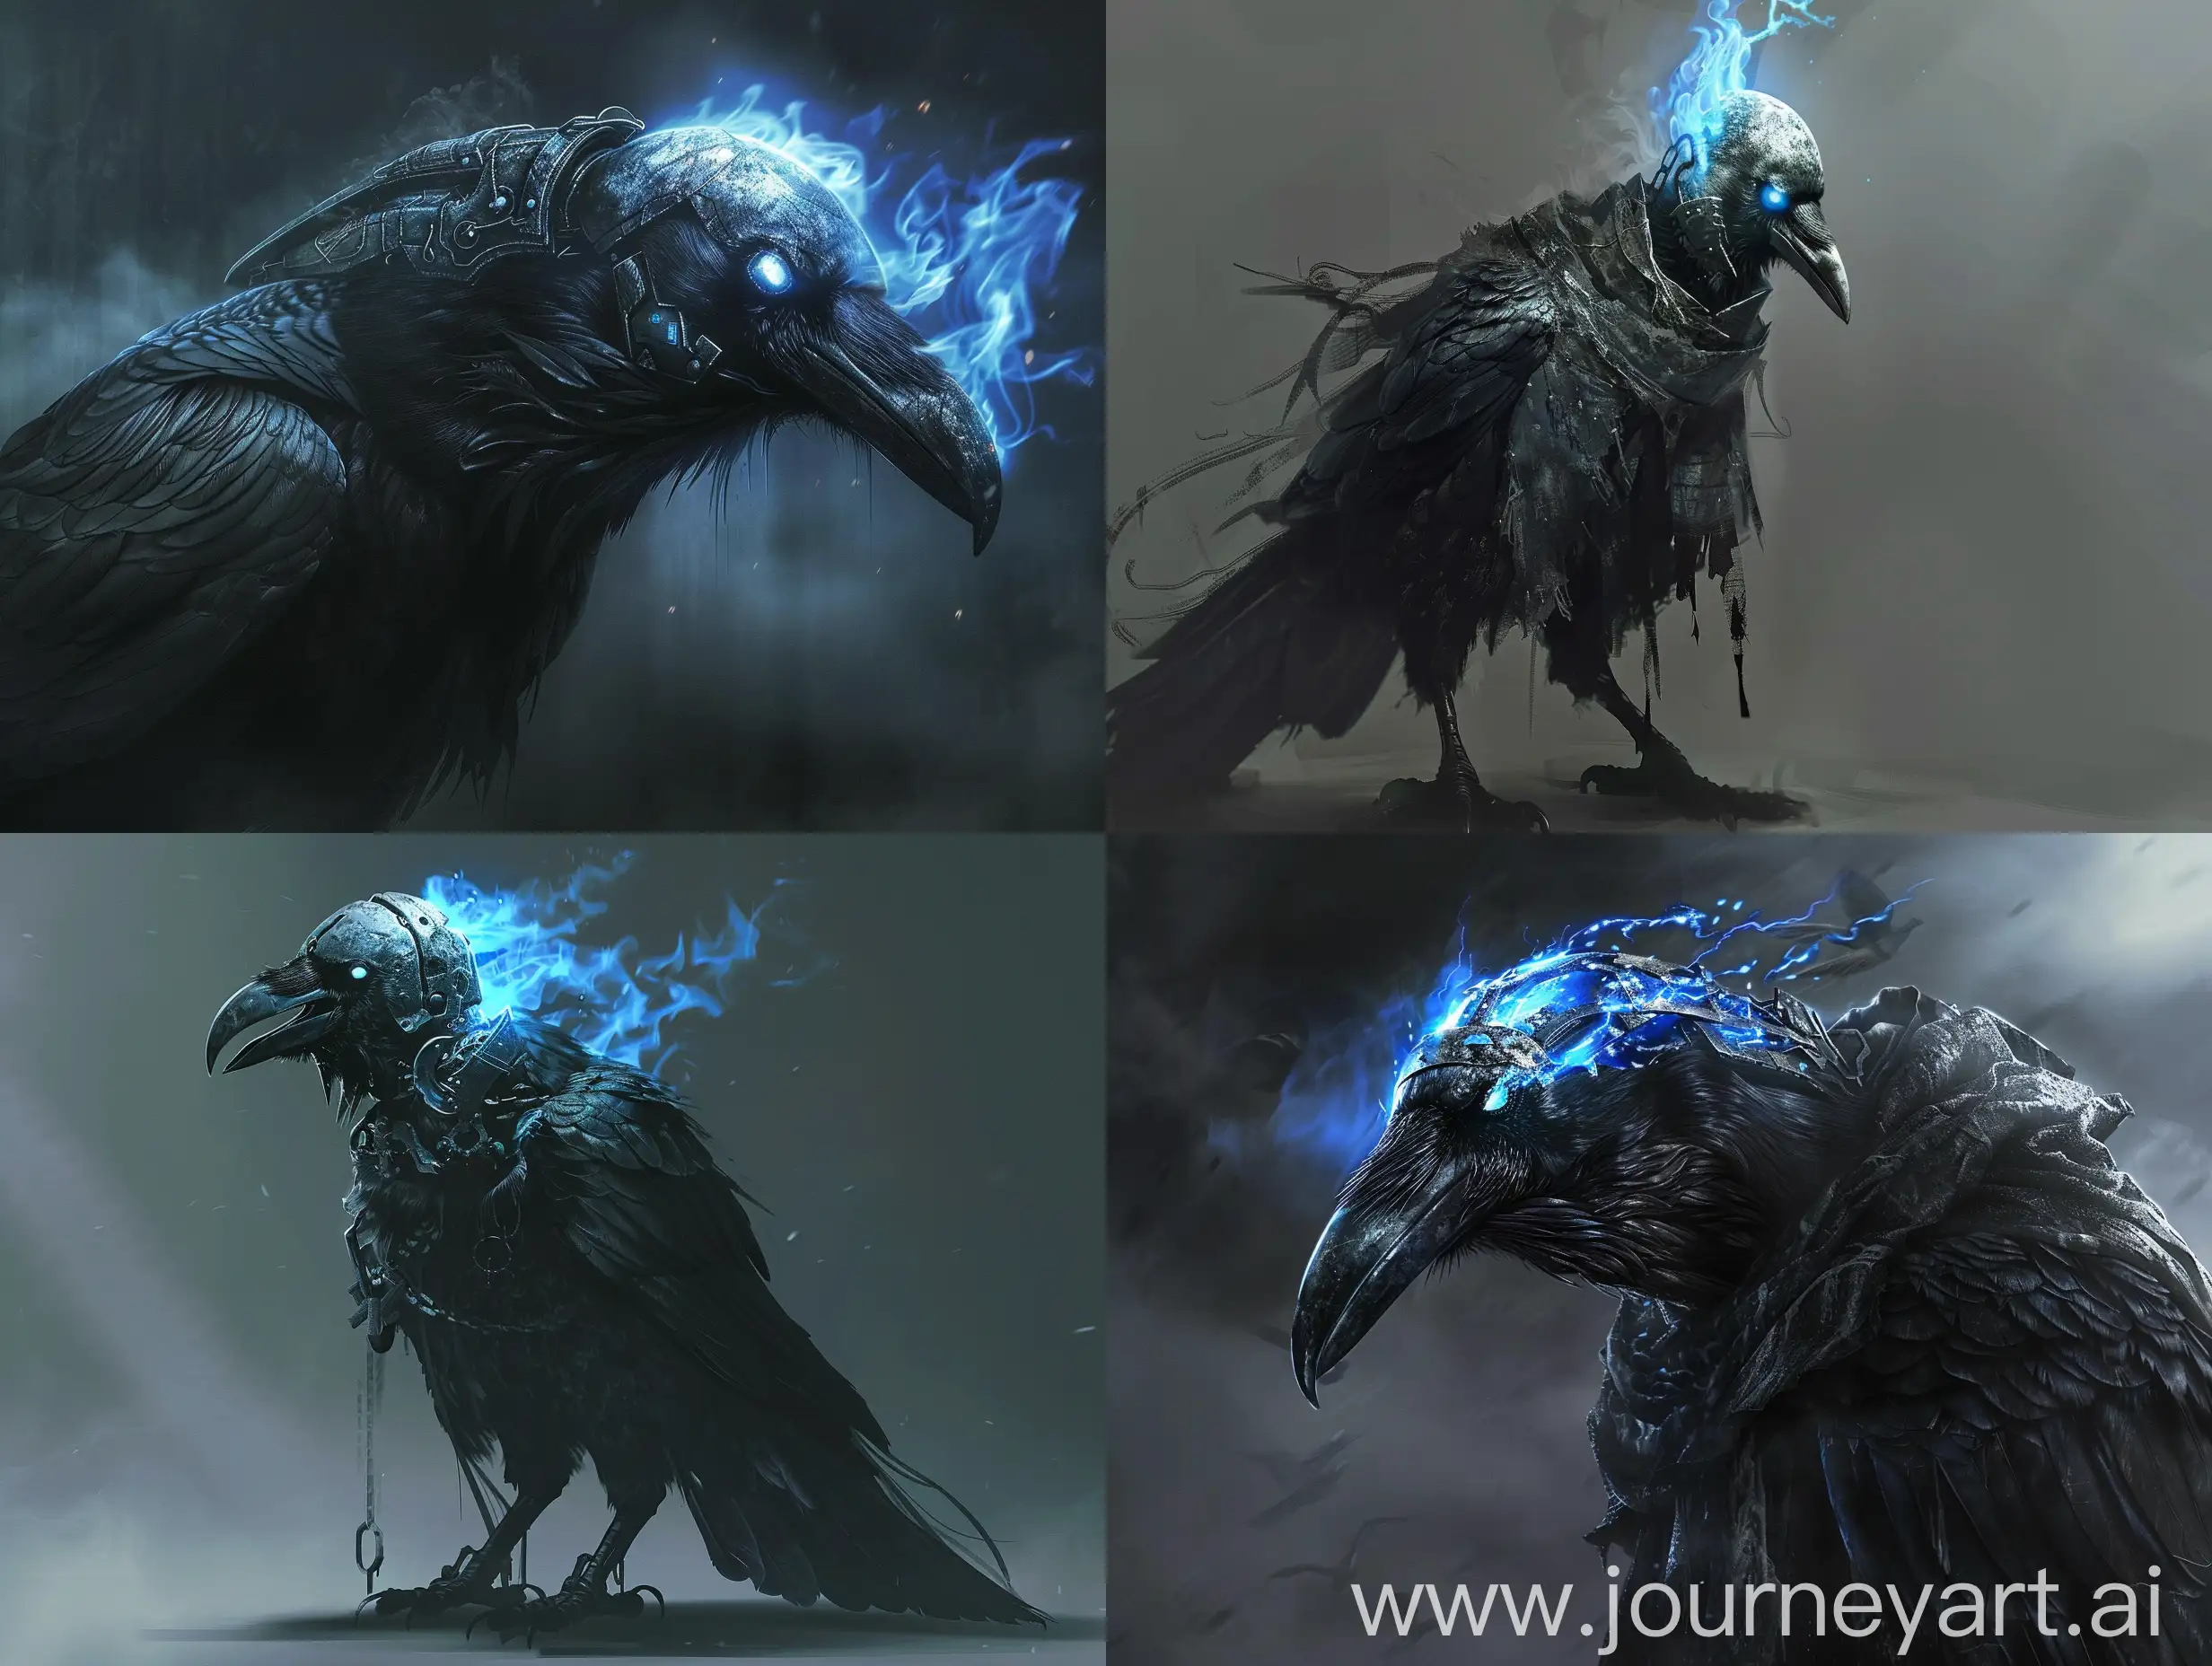 Epic-Dark-Fantasy-Giant-Raven-Boss-with-Blue-Ghostly-Flame